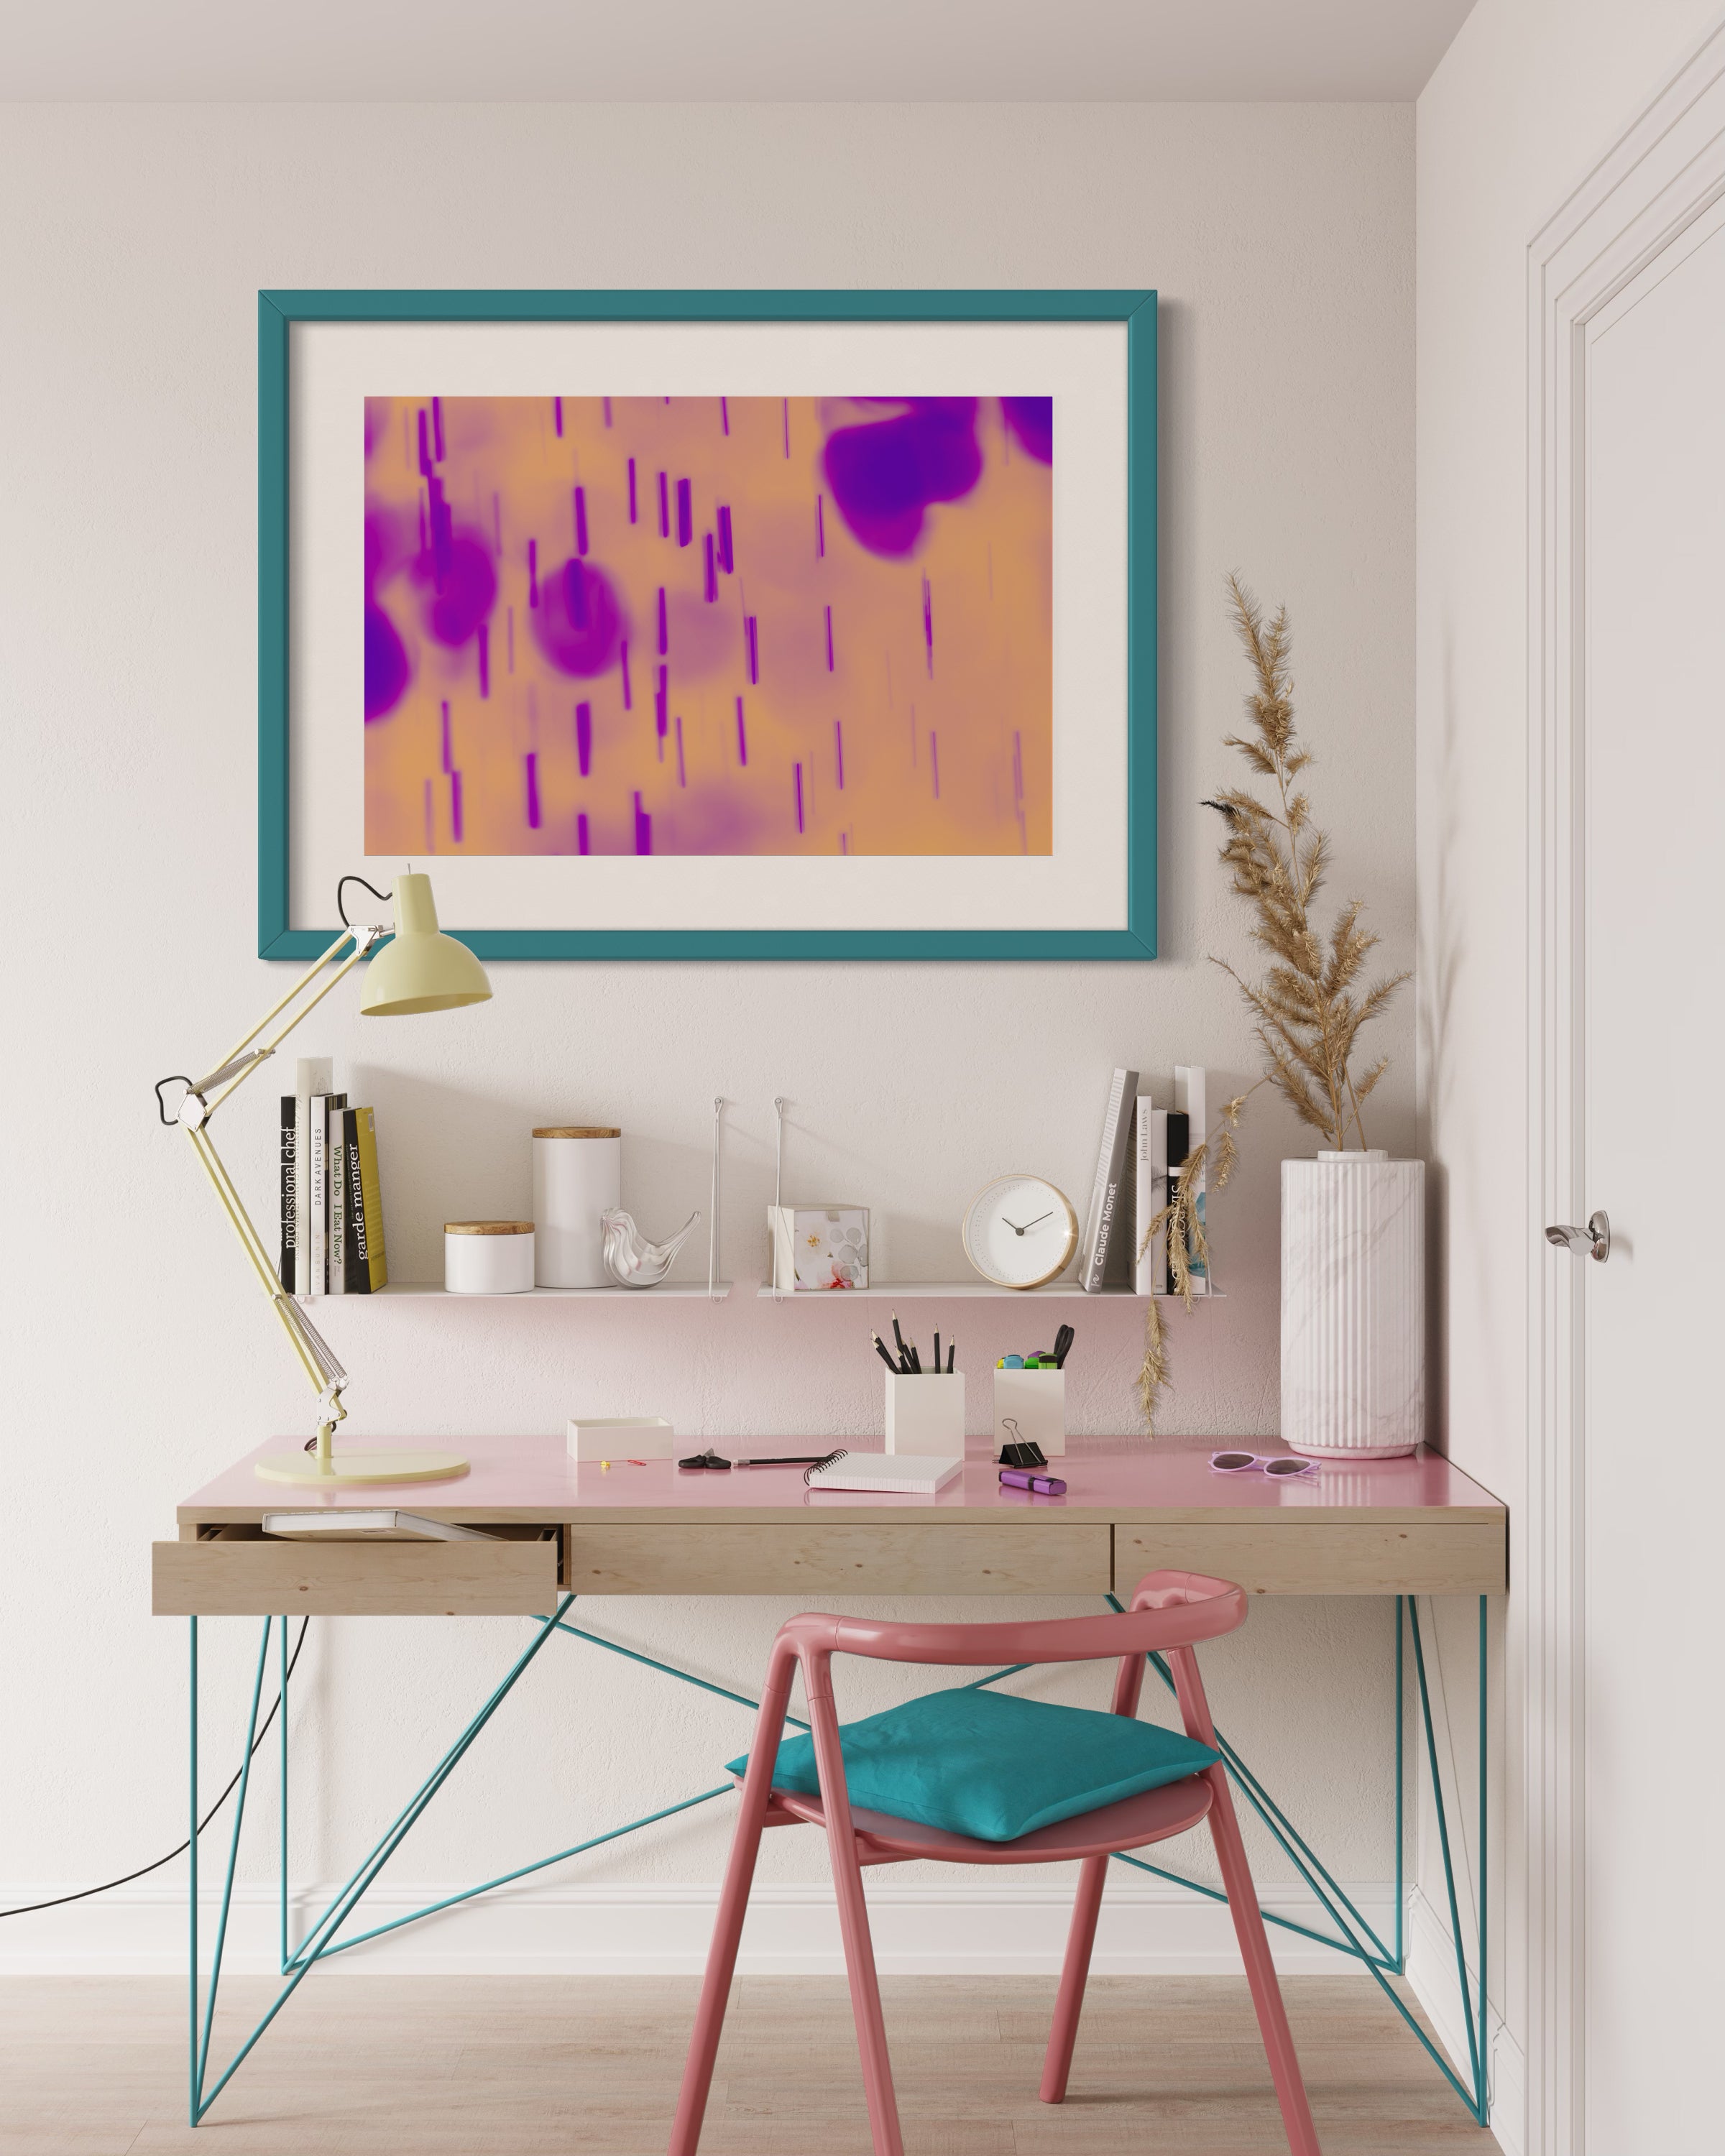 blurred rain in purple on pale yellow background in teal frame on wall in home office